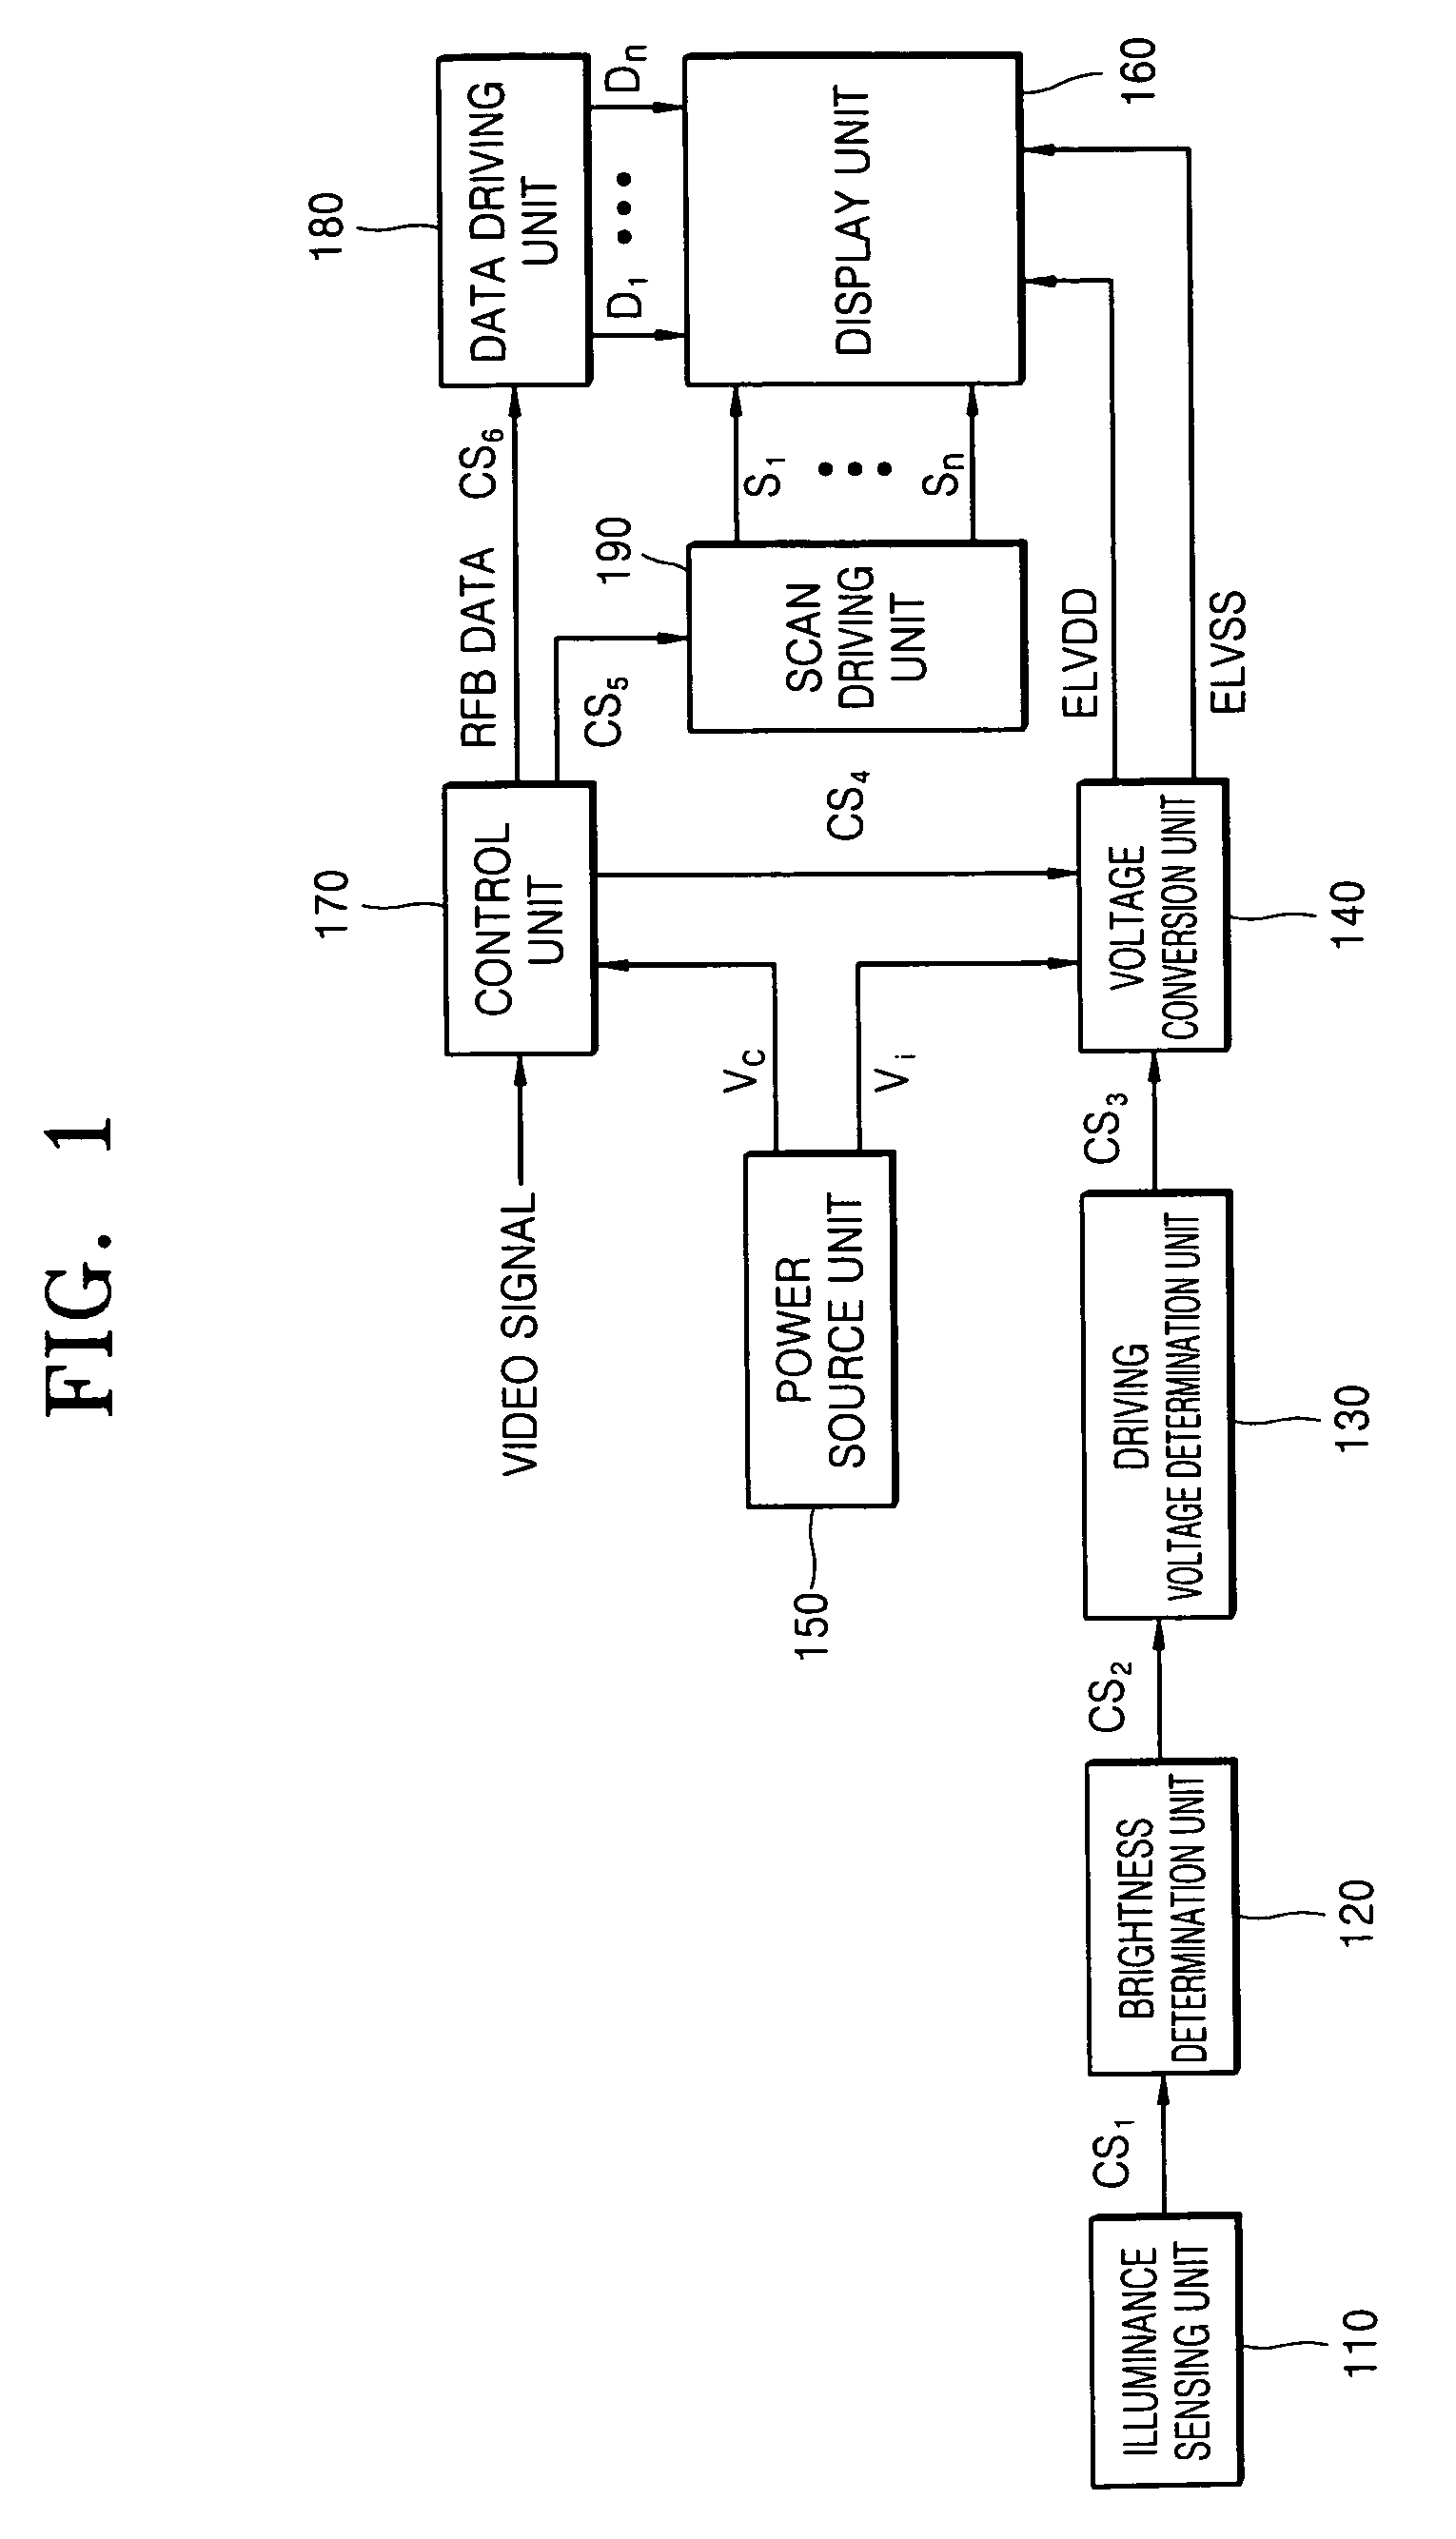 Organic light emitting diode (OLED) display adjusting for ambient illuminance and a method of driving the same